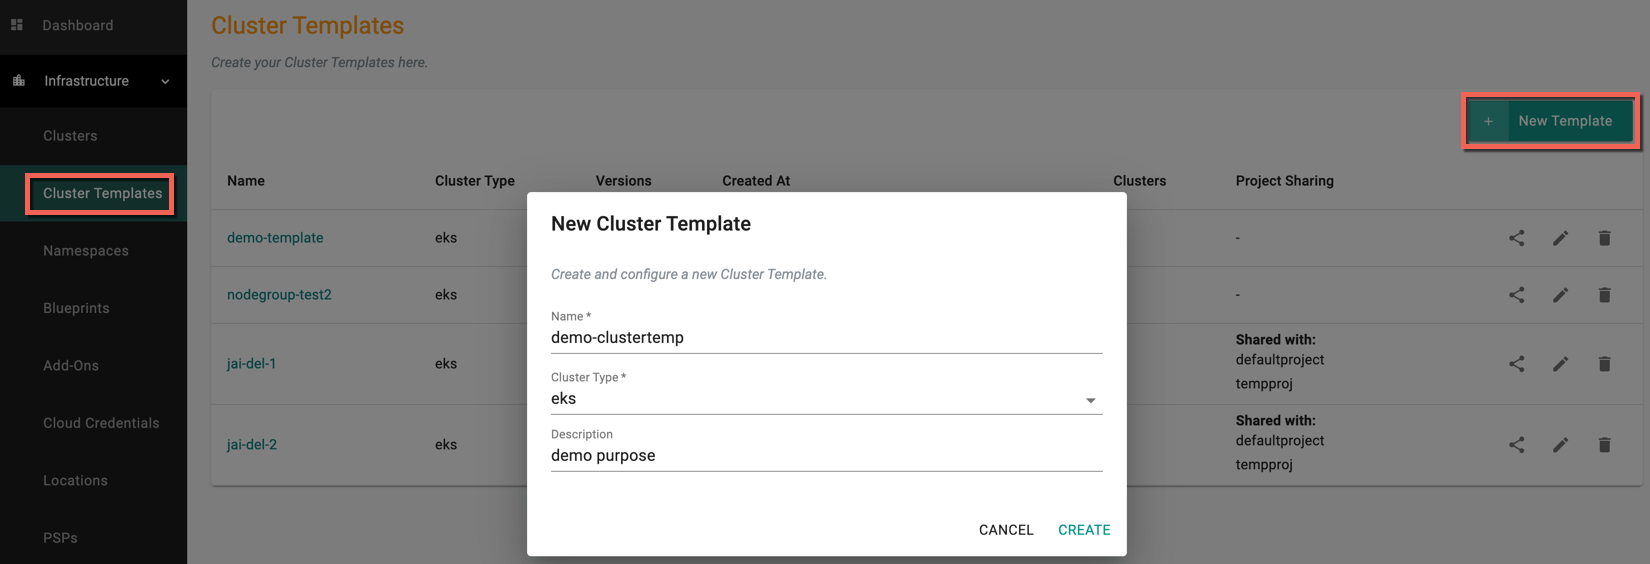 New Cluster Template